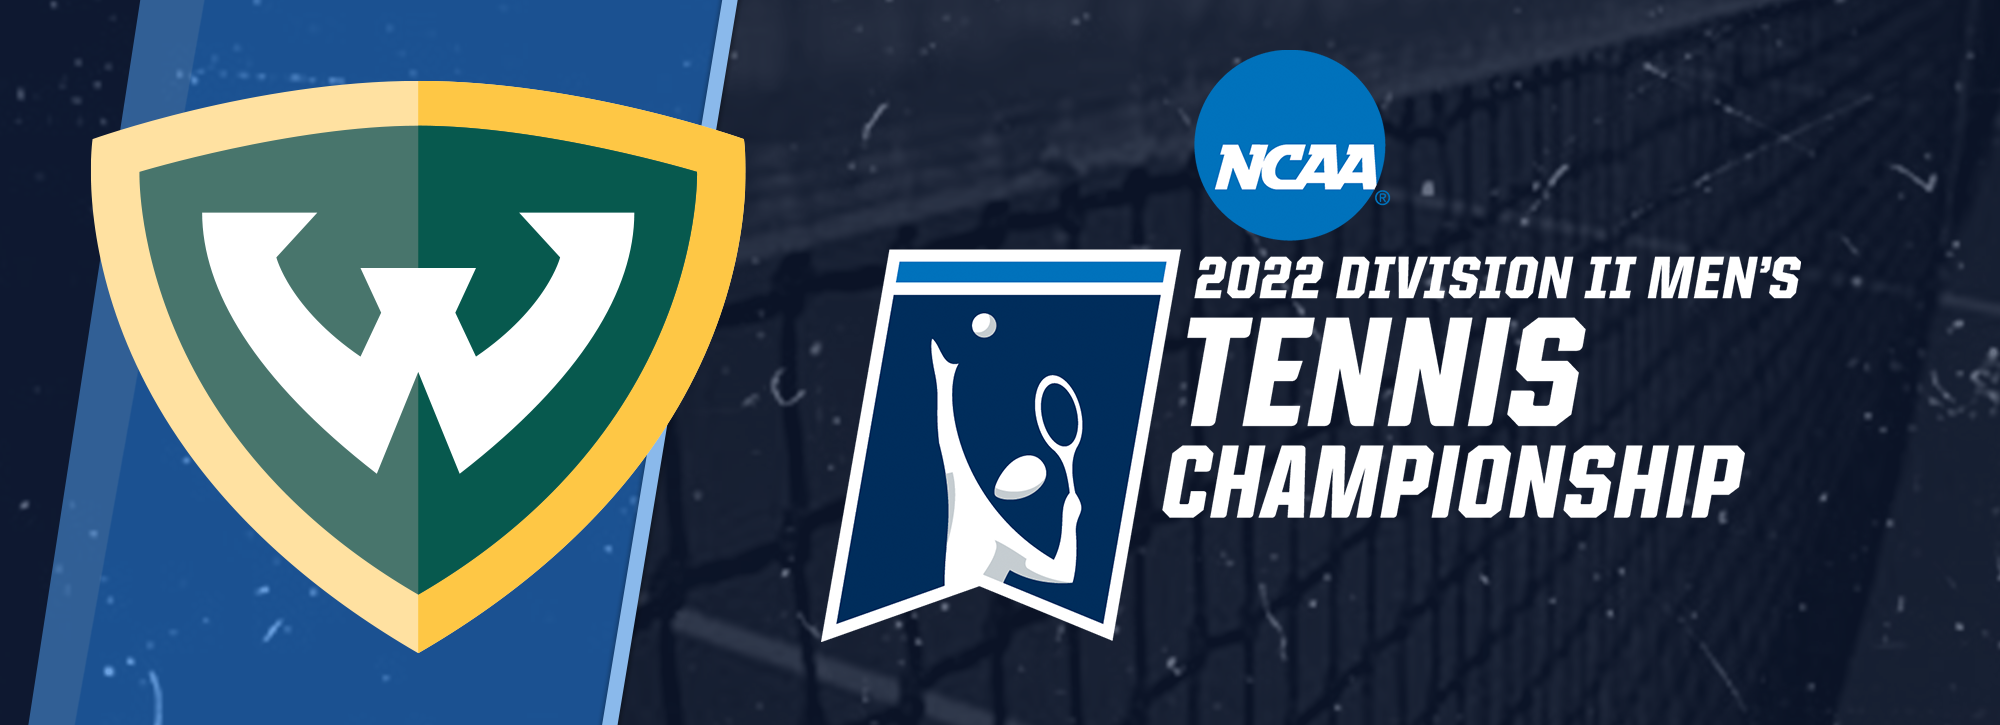 Wayne State Men's Tennis to play for national championship